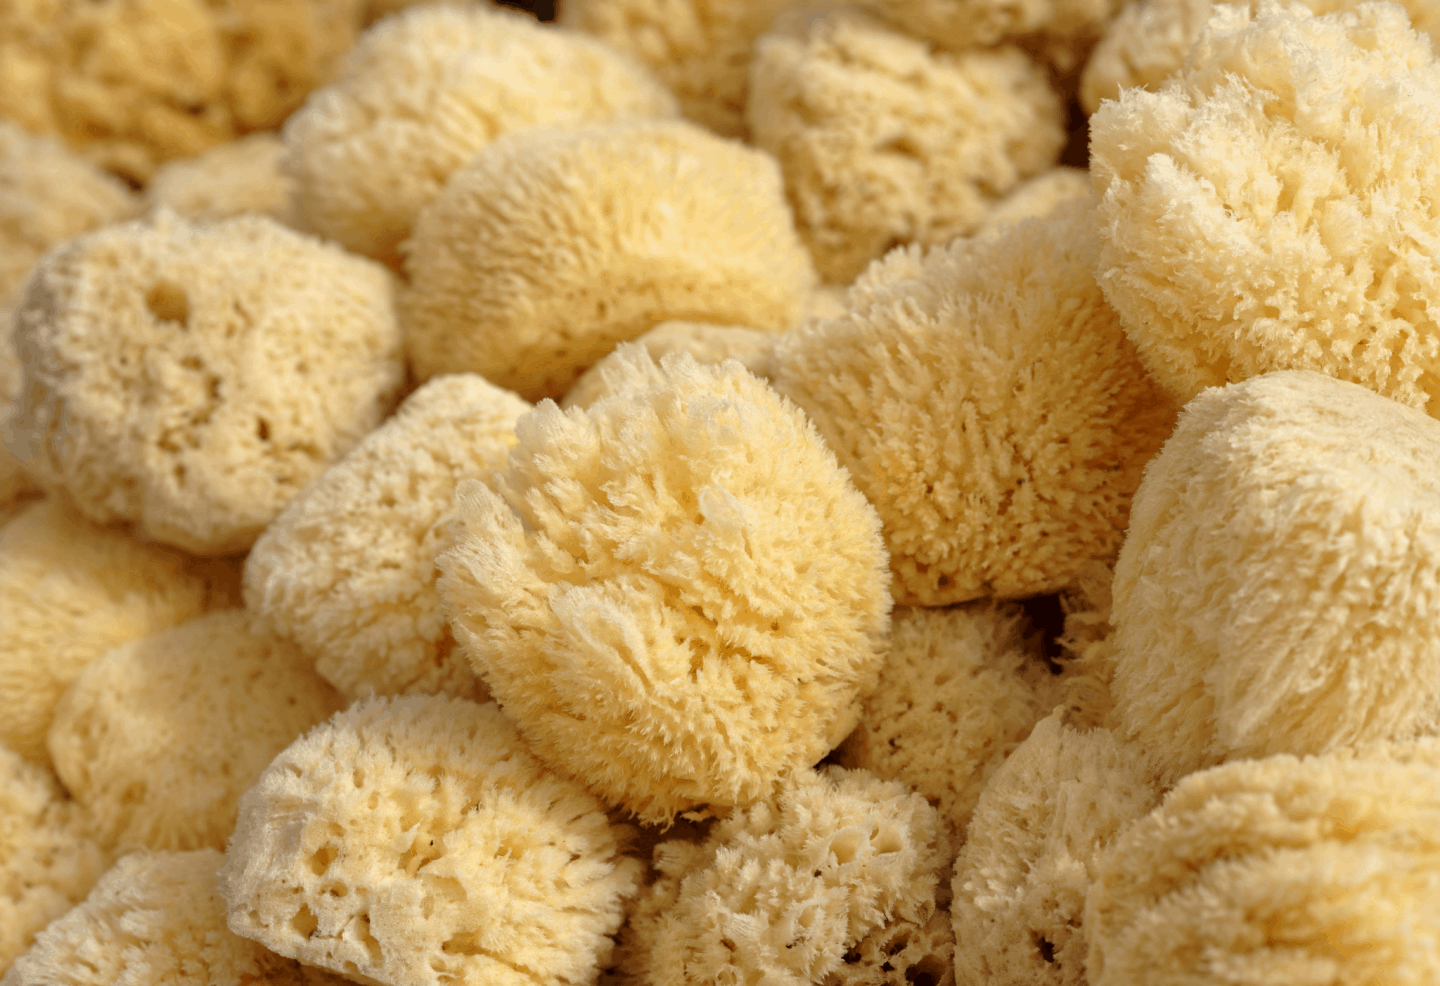 a pile of sea sponges which can be an alternative to plastic sponges